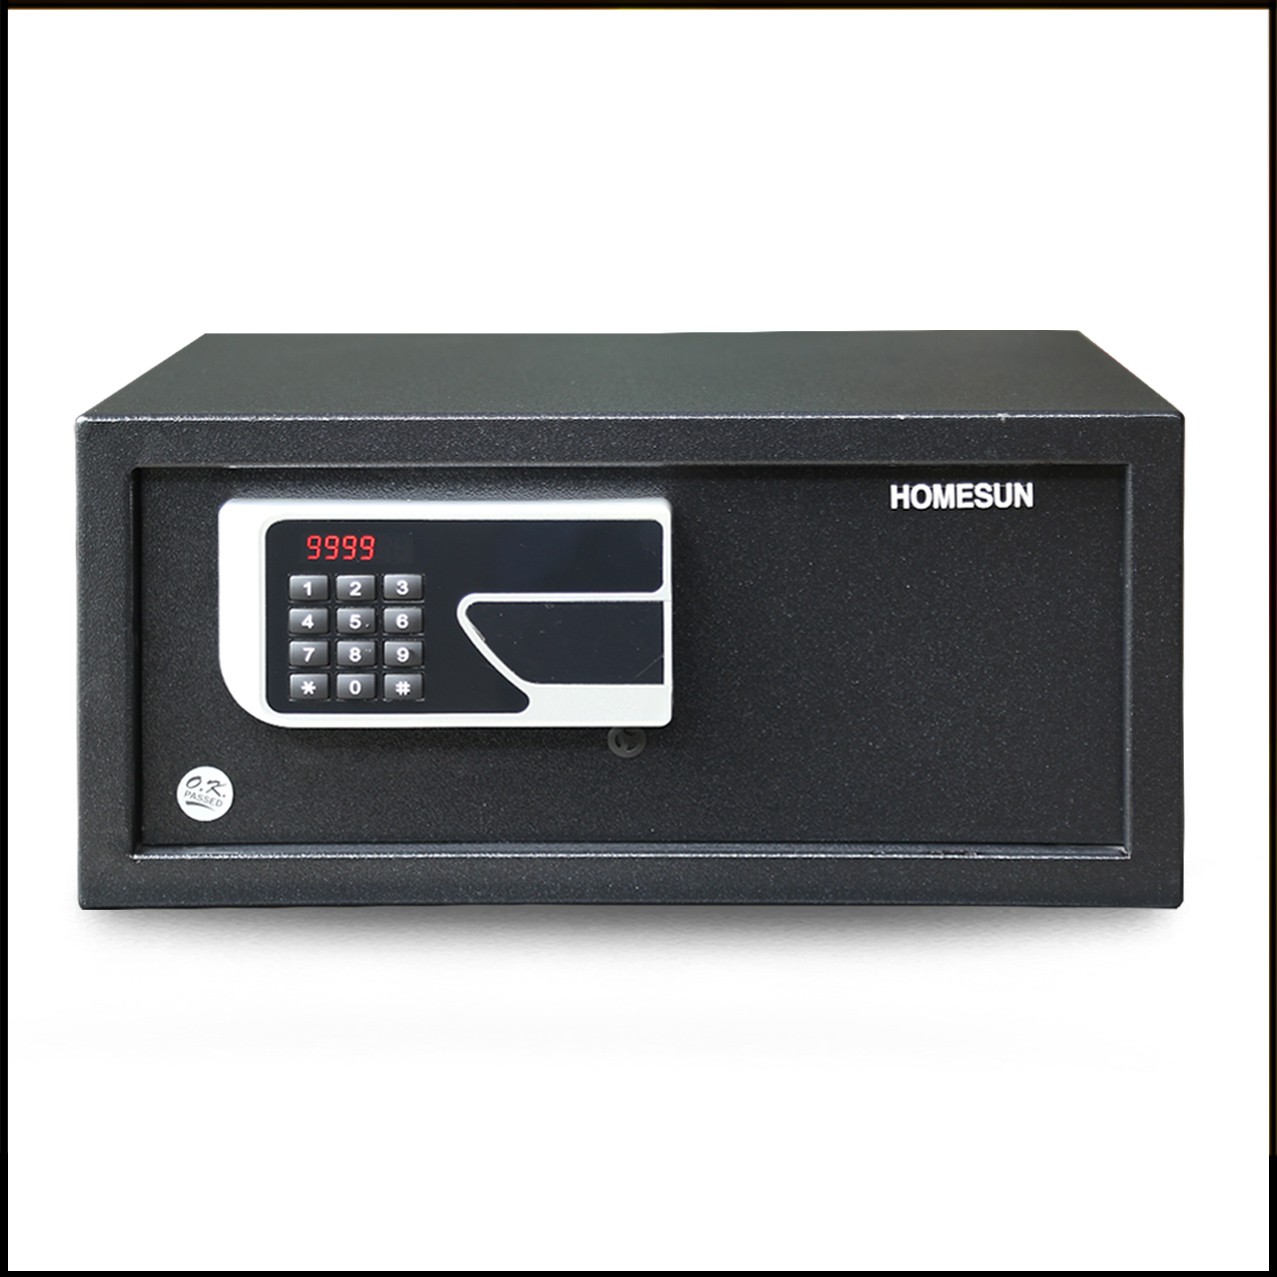 Hotel Safe Dimensions Wholesale Suppliers